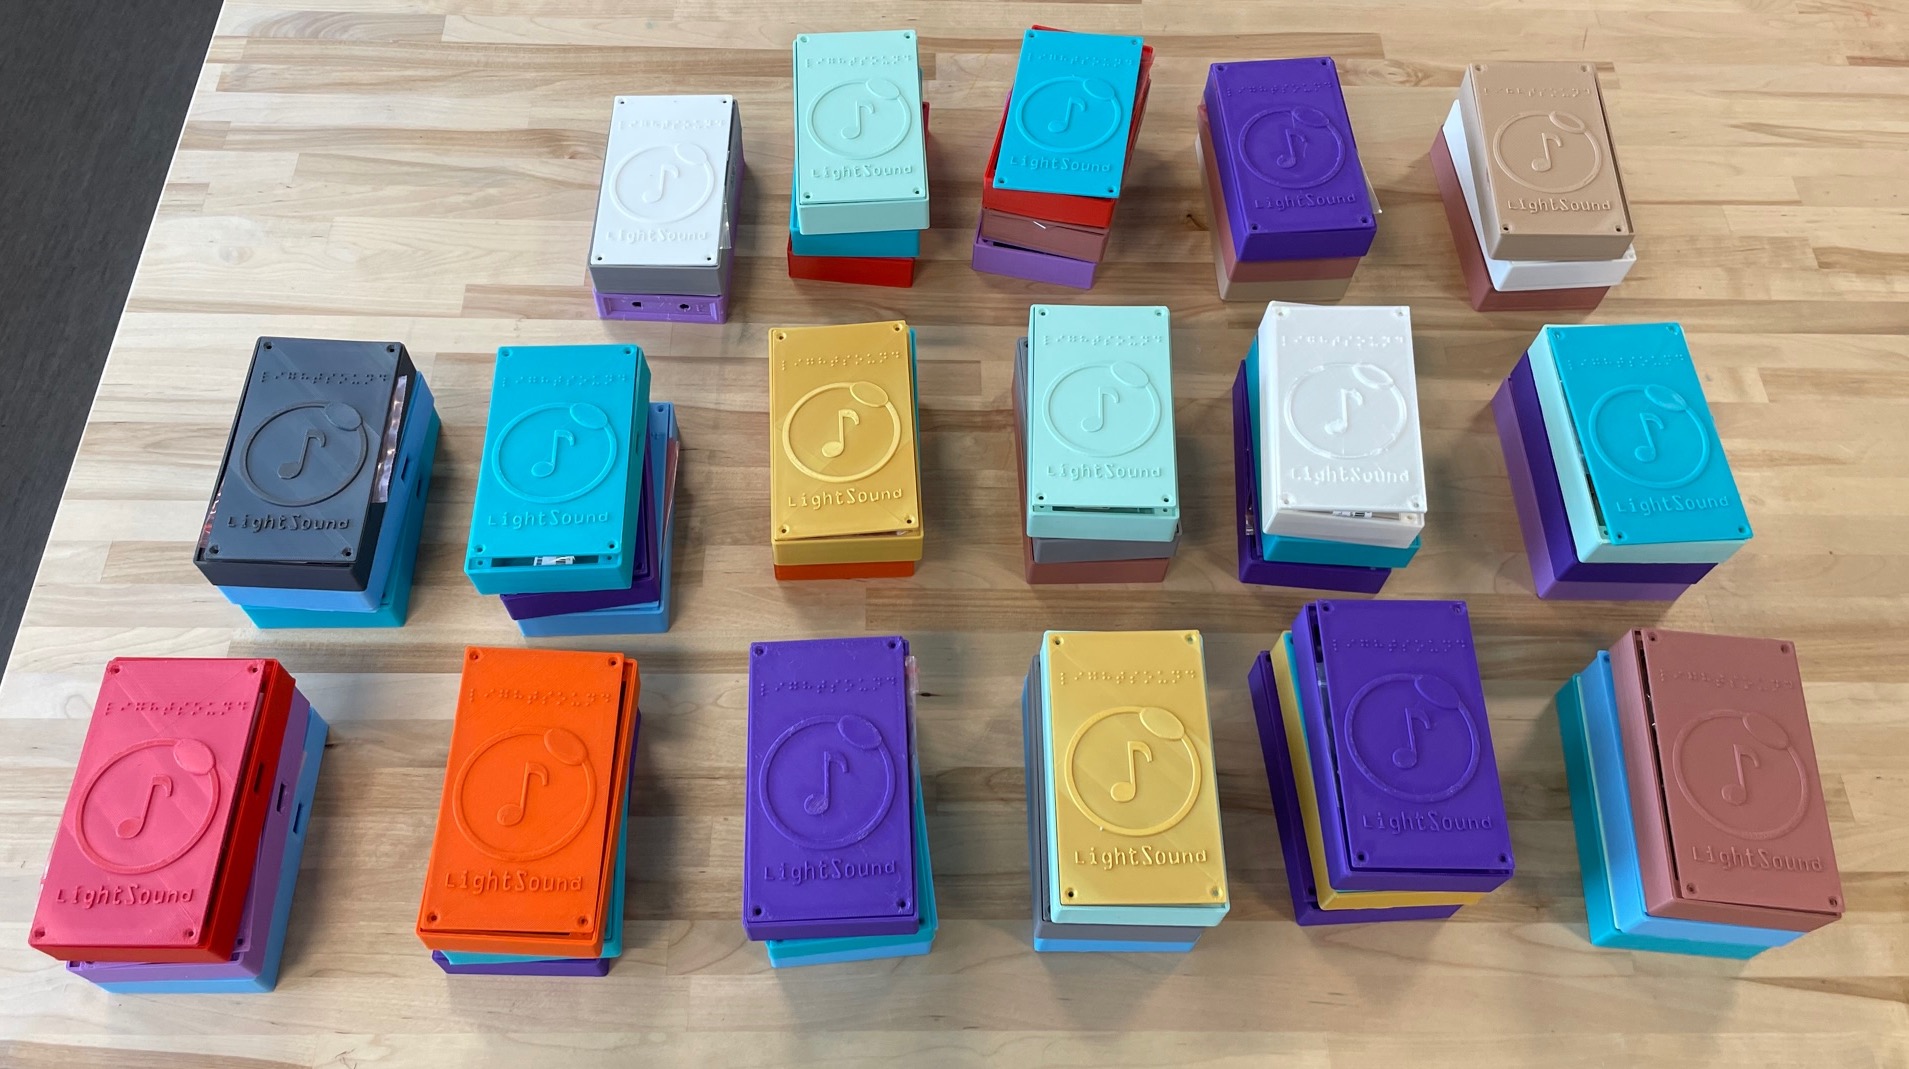 A table with three rows of 3D printed LightSound device cases. The cases are all different colors and stacked about three devices high. The case is about the size of a smart phone and the lid has the LightSound logo which is a musical note in a circle with the word LightSound underneath and LightSound written in Braille above.